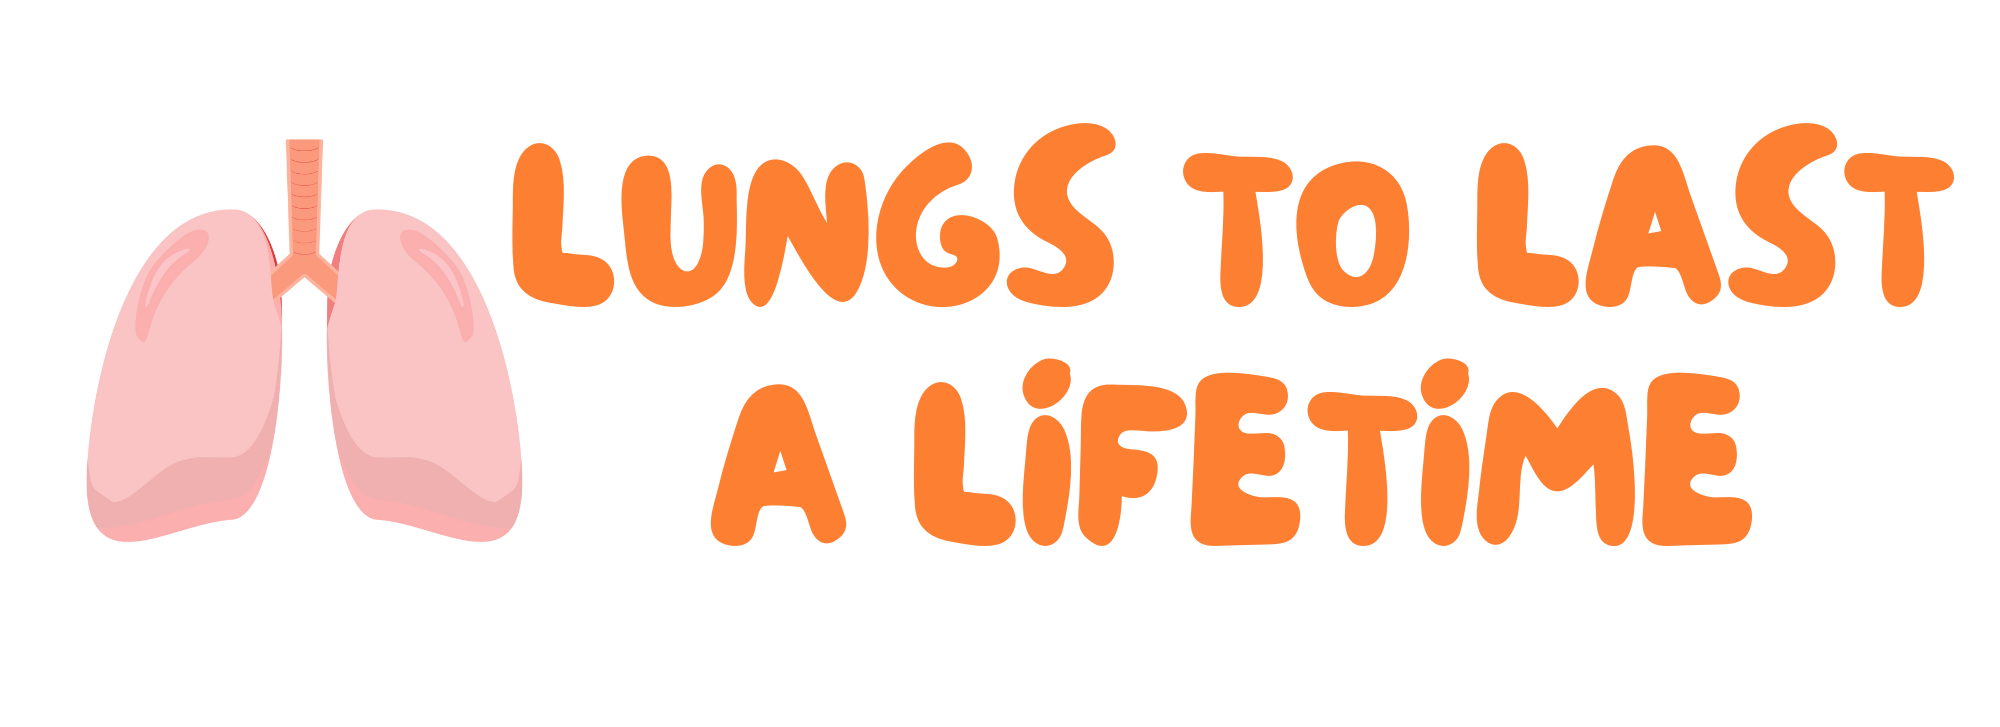 Lungs to Last Logo